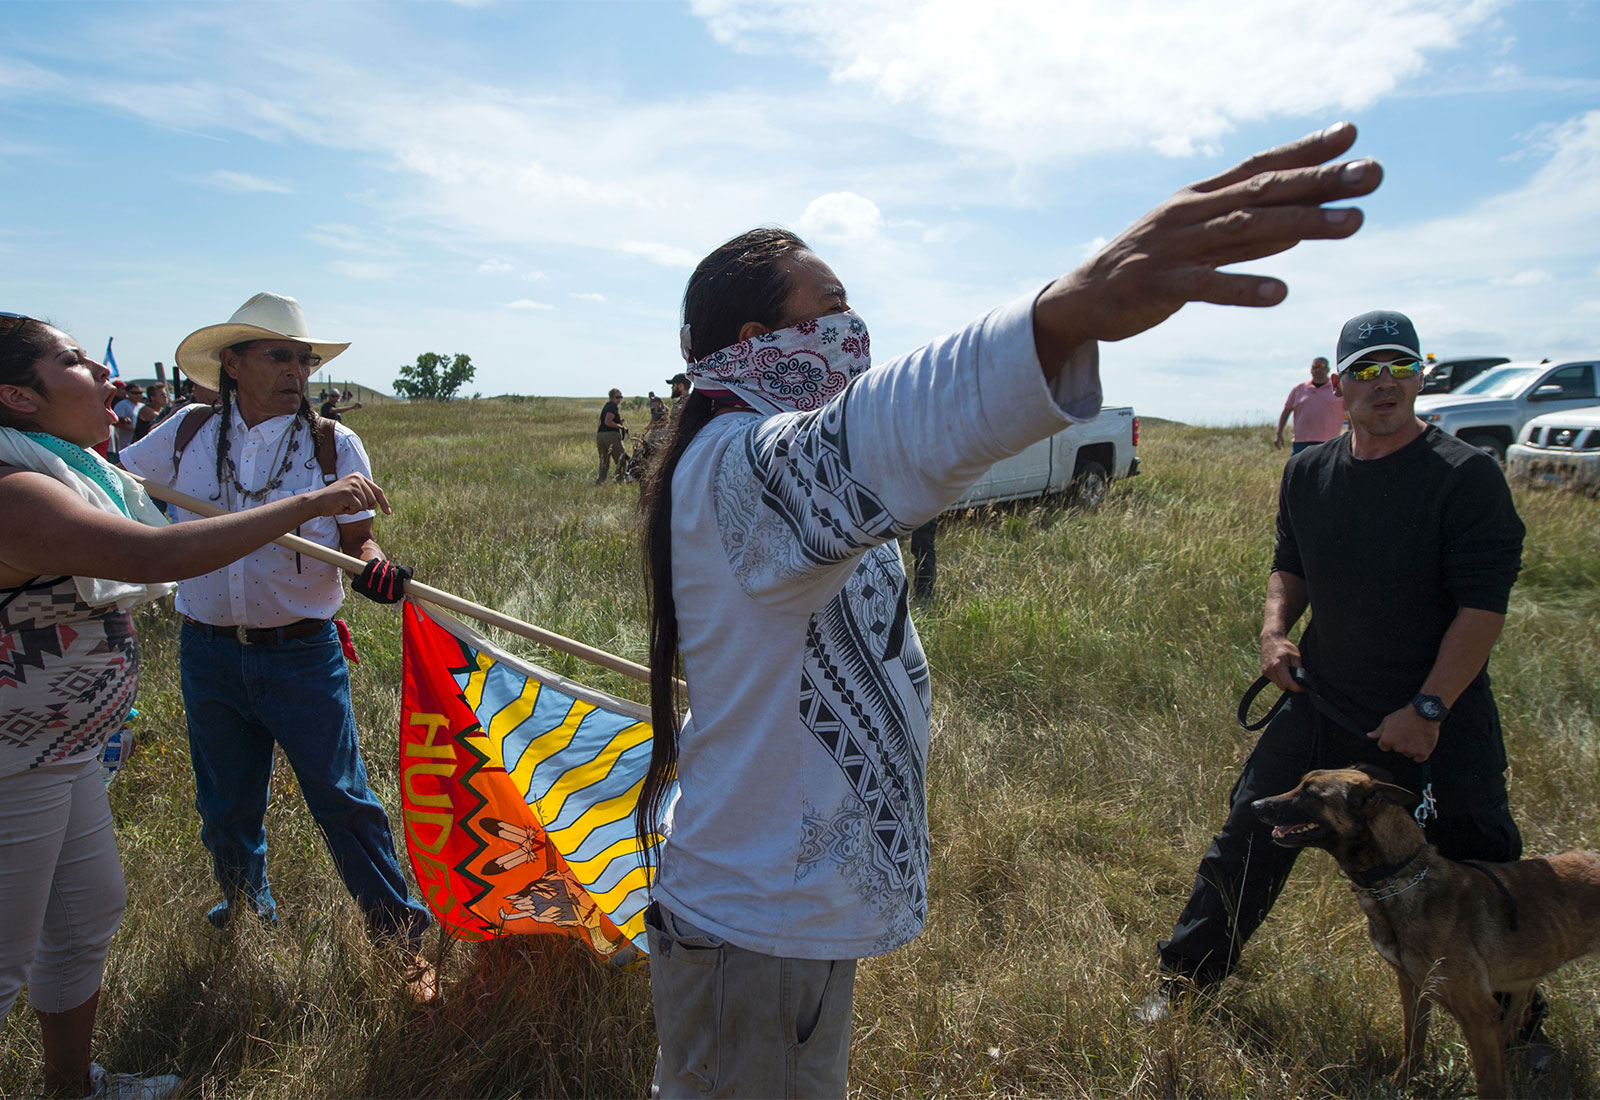 Indigenous people raise their arms and a flag at a security guard holding a dog by the leash at the Dakota Access Pipeline site